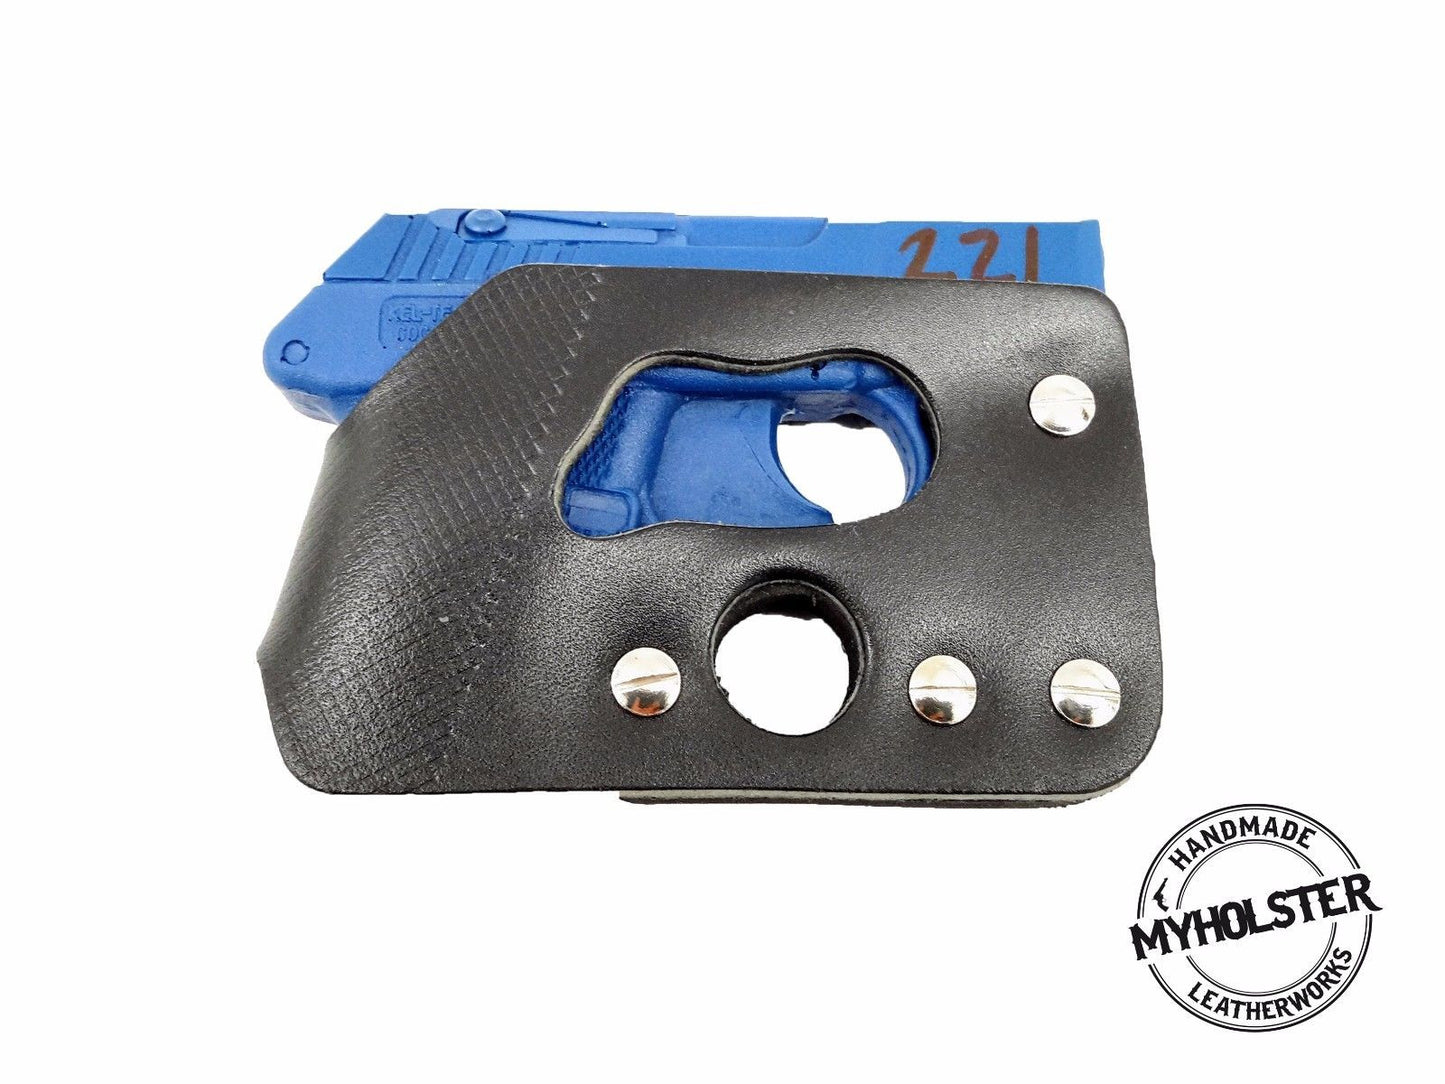 Concealed Carry Shoot-Through Wallet Holster for Ruger LCP 380 & Kel-Tec P-3AT